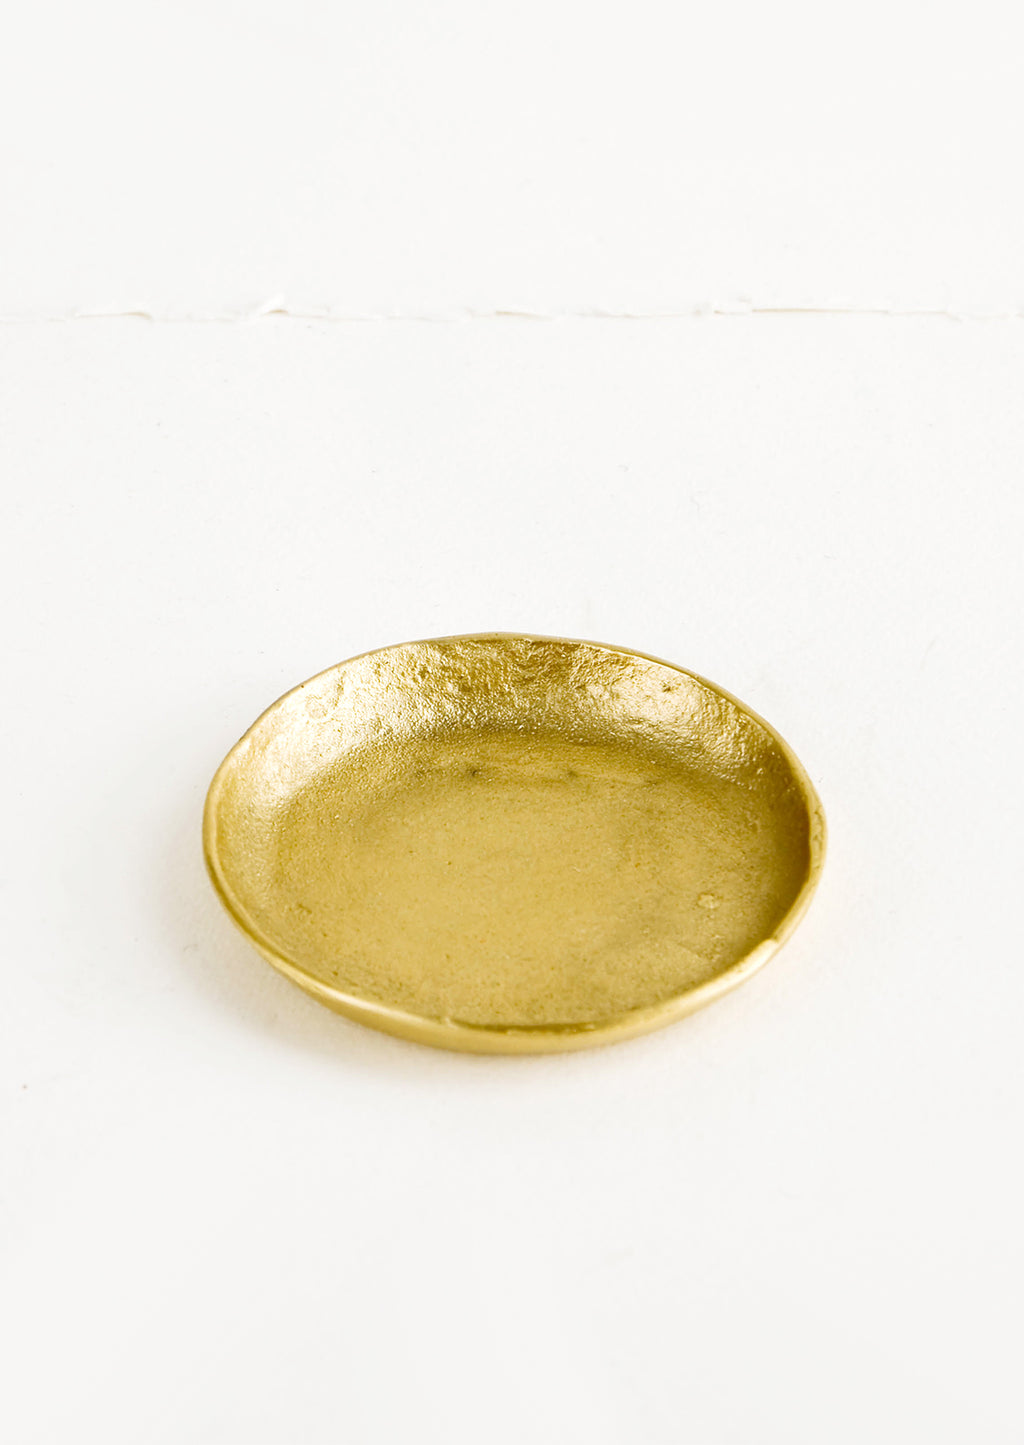 Plate: Small brass plate with organic, natural texture